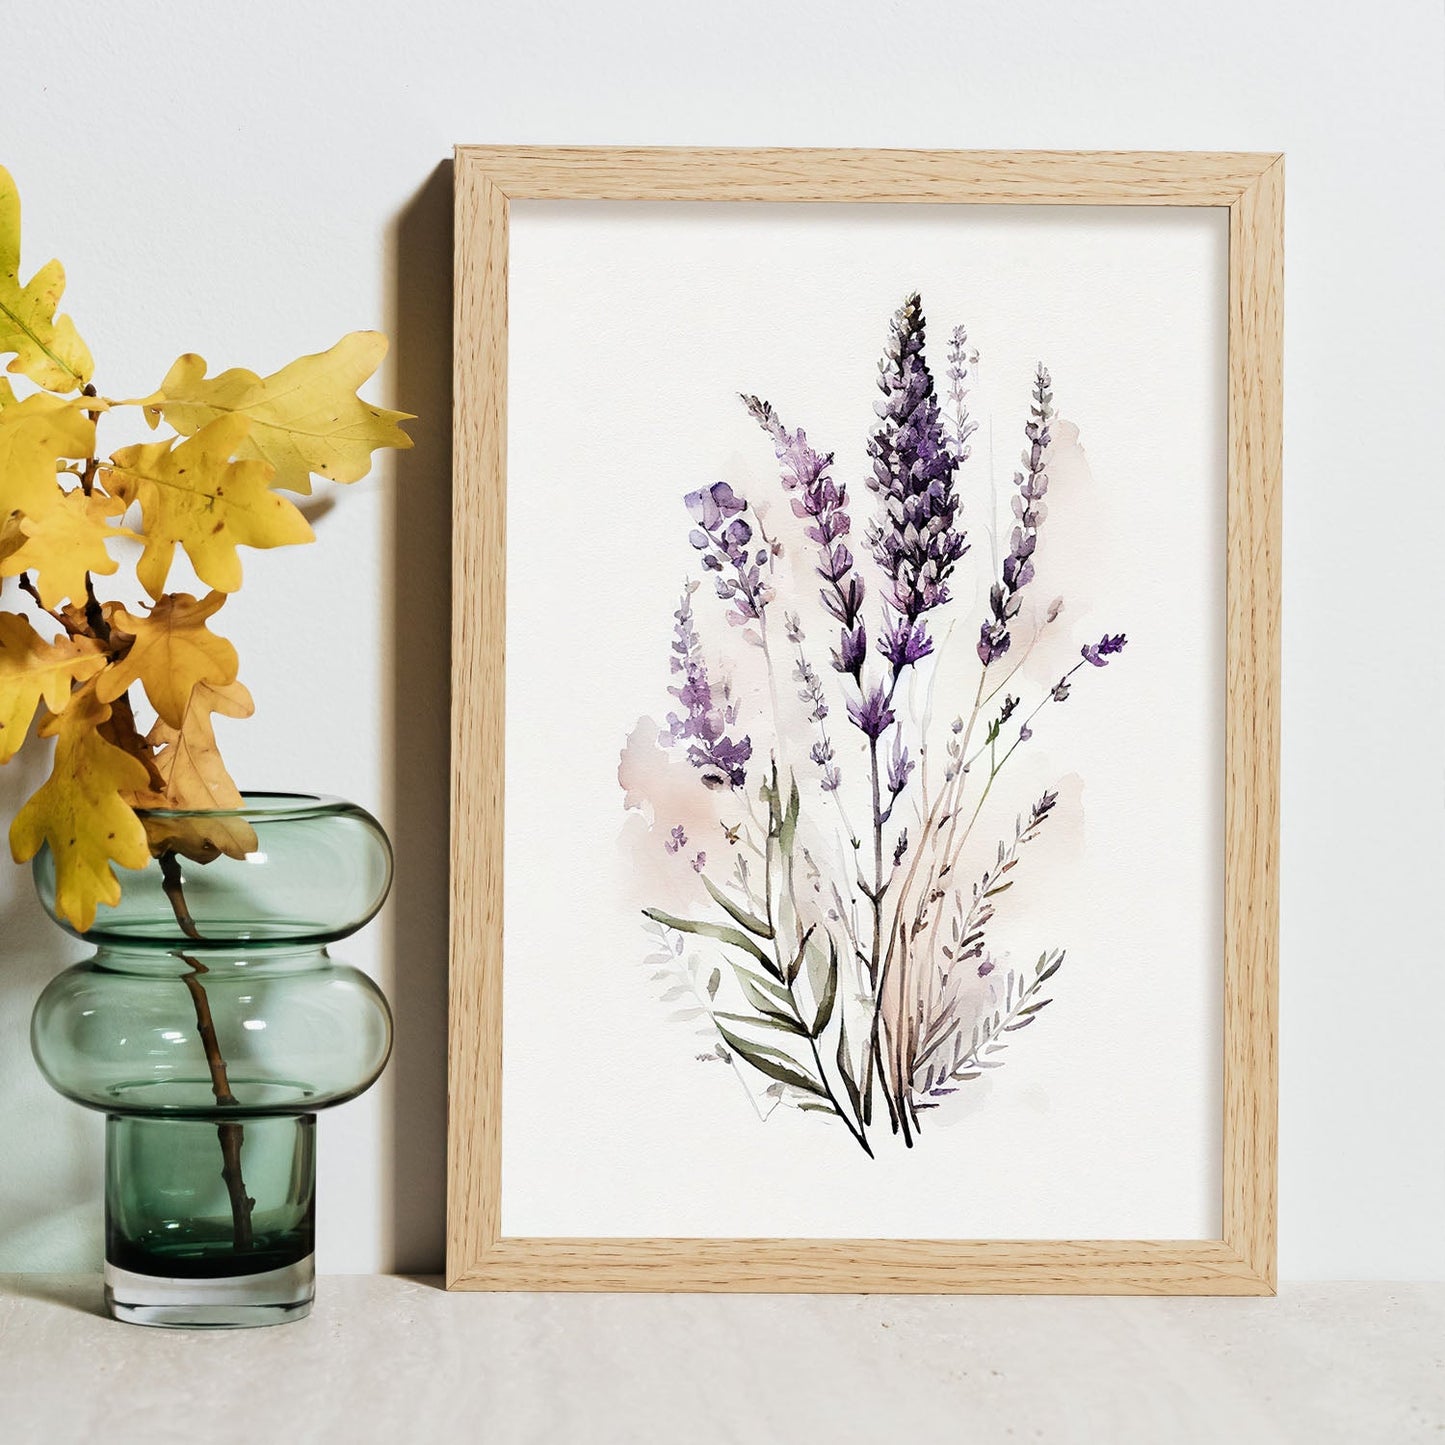 Nacnic watercolor minmal Lavender_1. Aesthetic Wall Art Prints for Bedroom or Living Room Design.